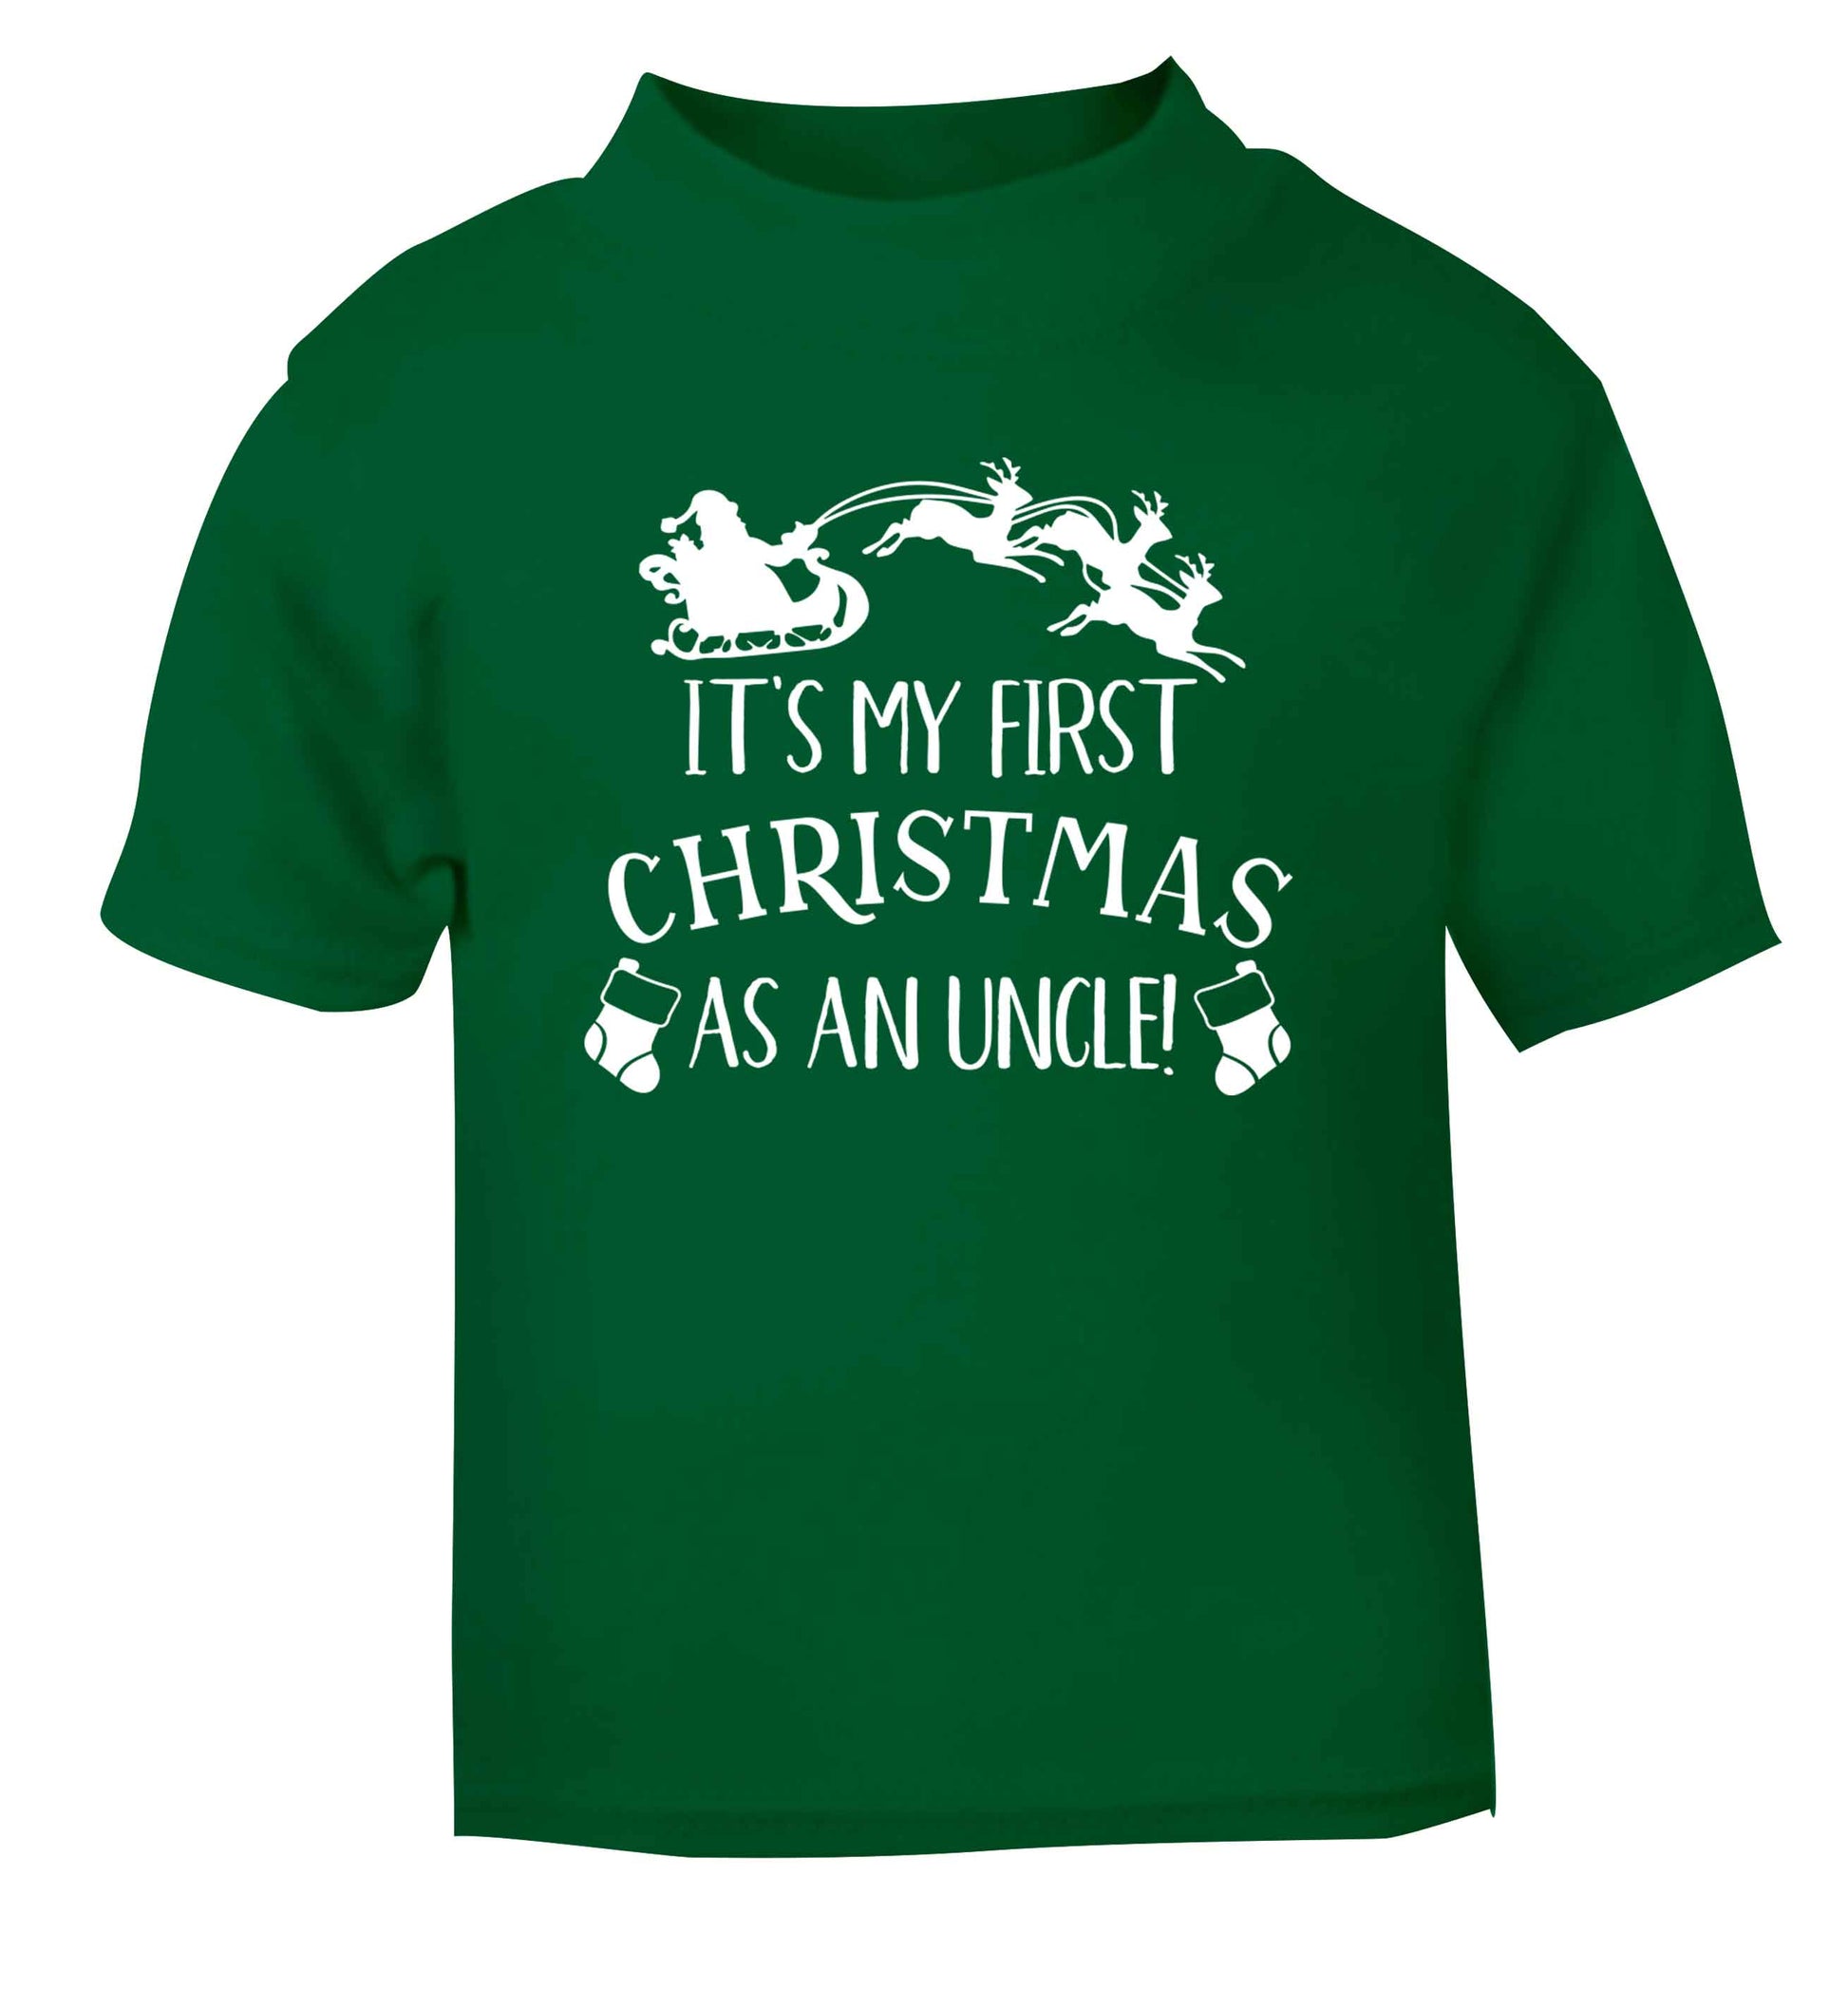 It's my first Christmas as an uncle! green Baby Toddler Tshirt 2 Years